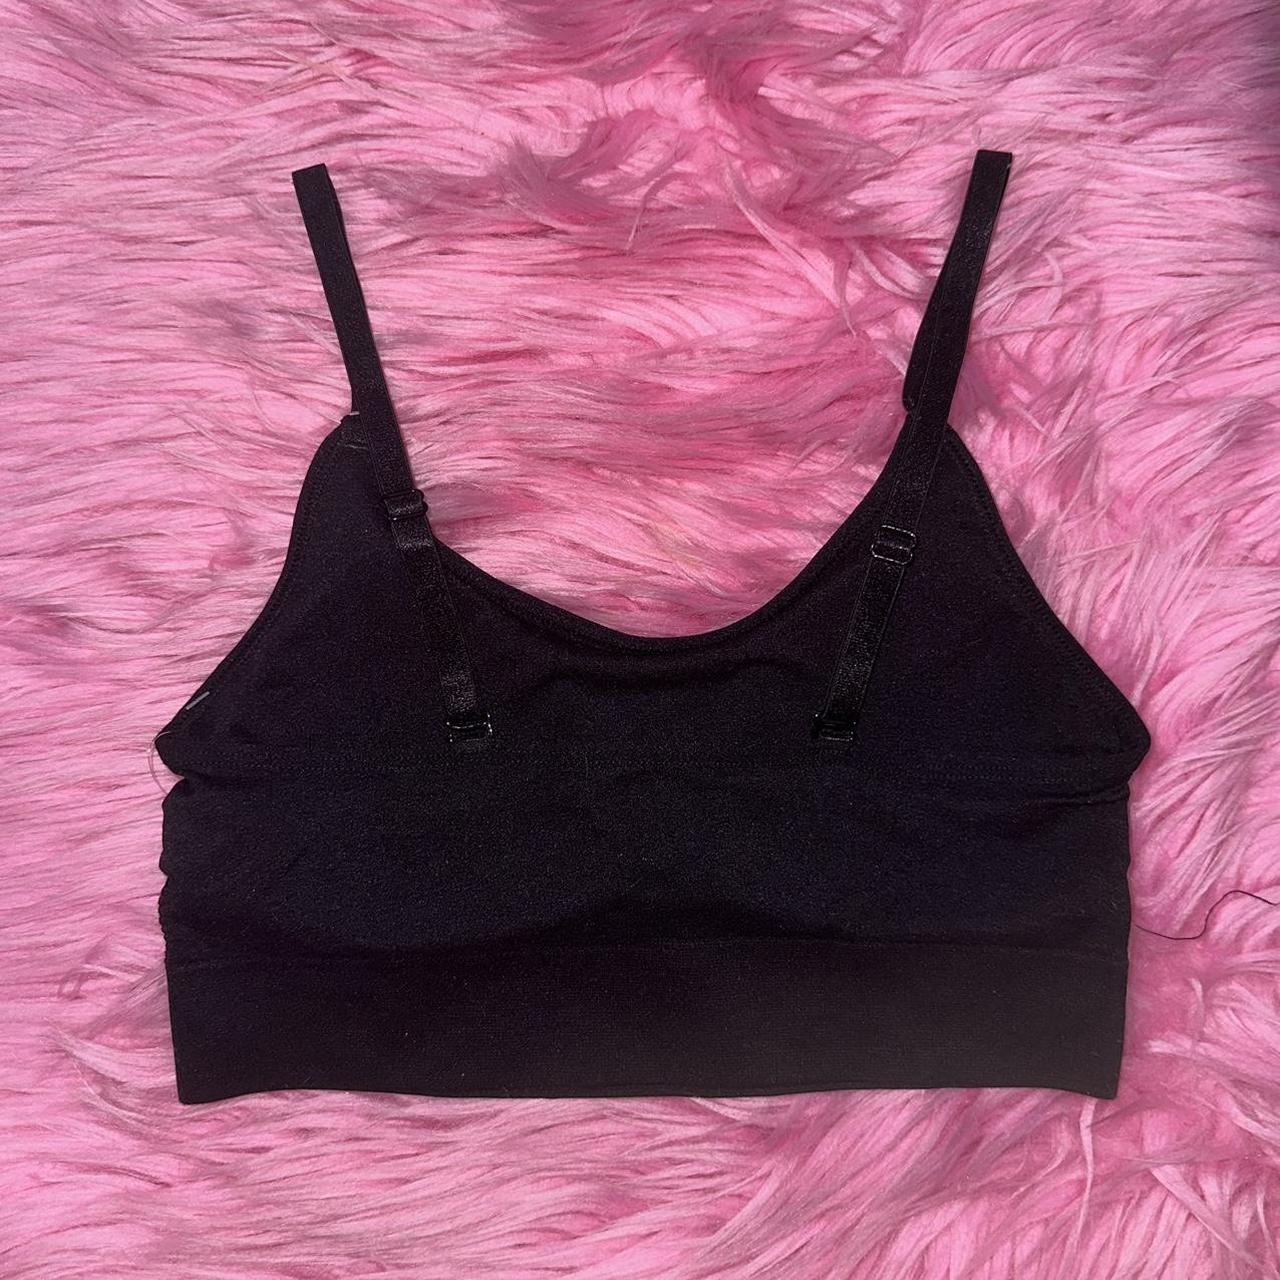 Juicy Couture Black Sports Bra With Rhinestones And Padded Size Medium 🌹